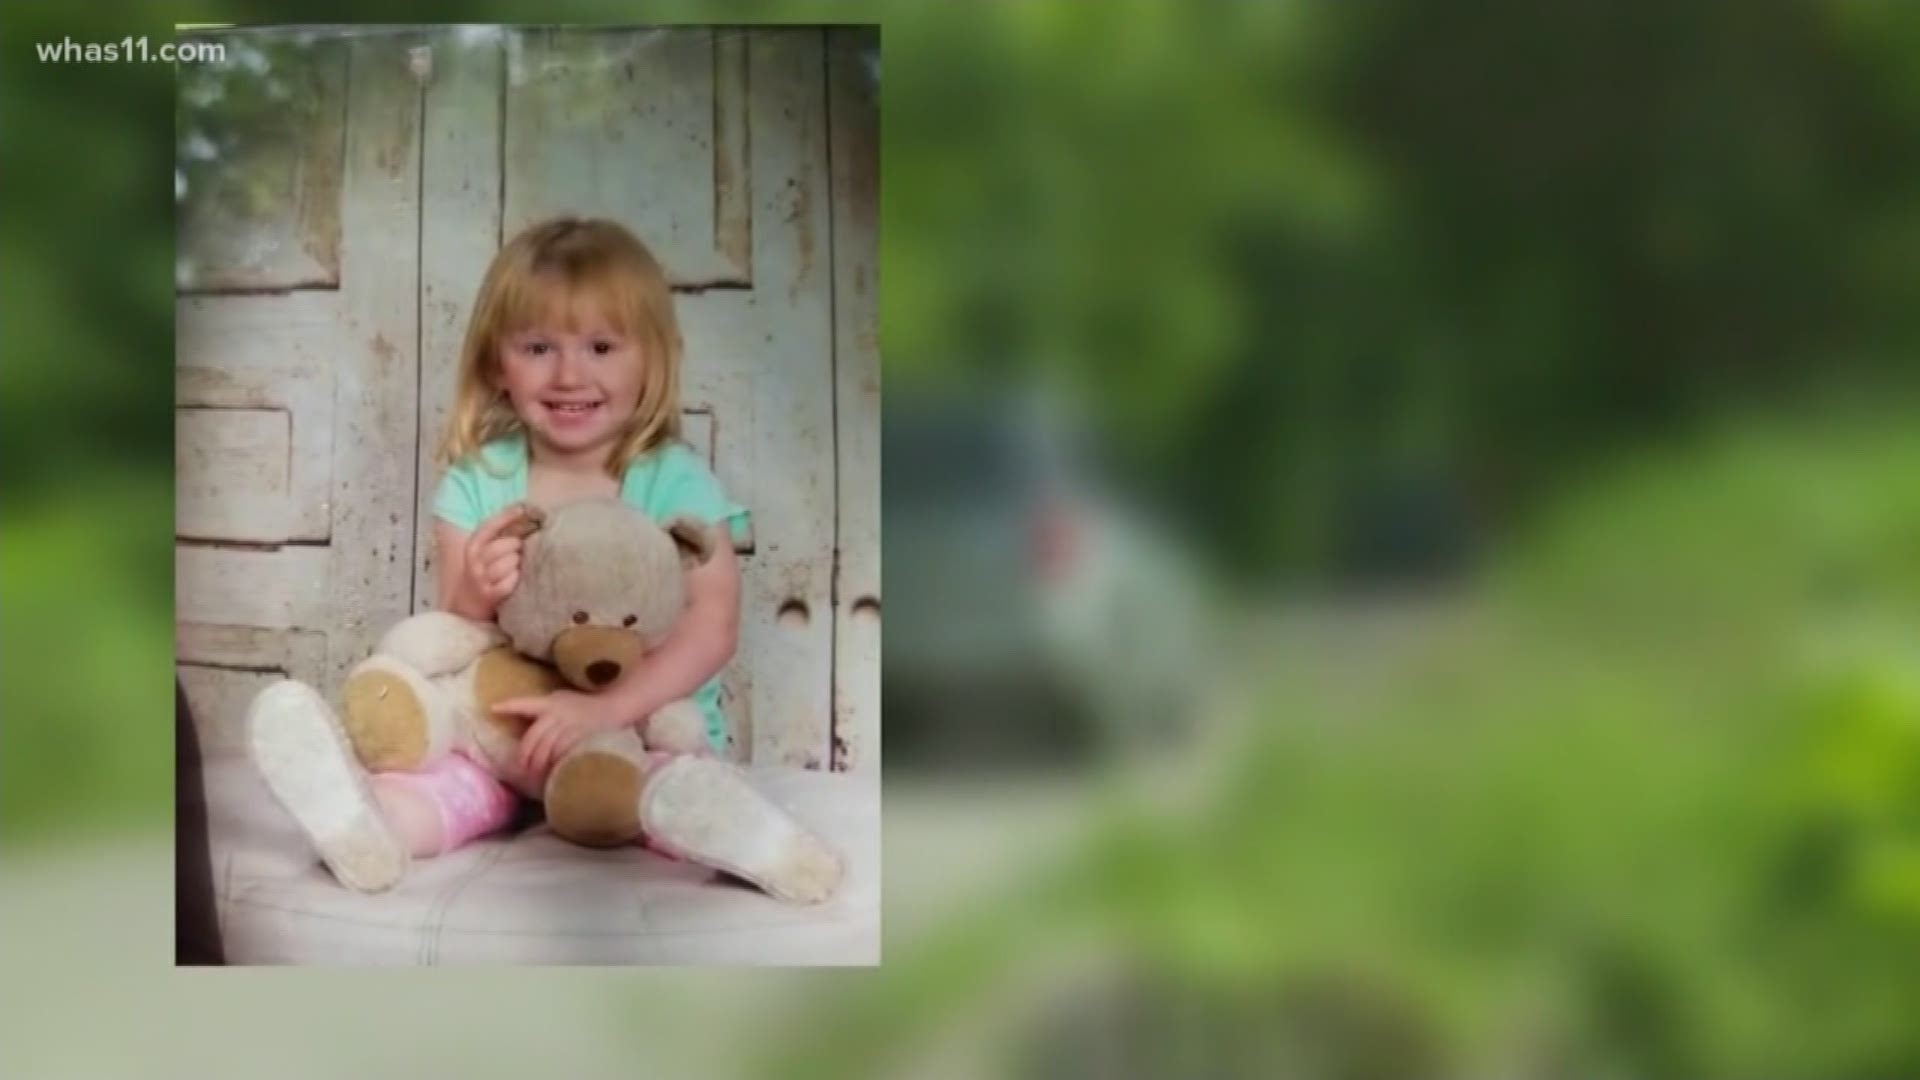 A grandmother has been charged in connection with the missing Bullitt County girl's case.